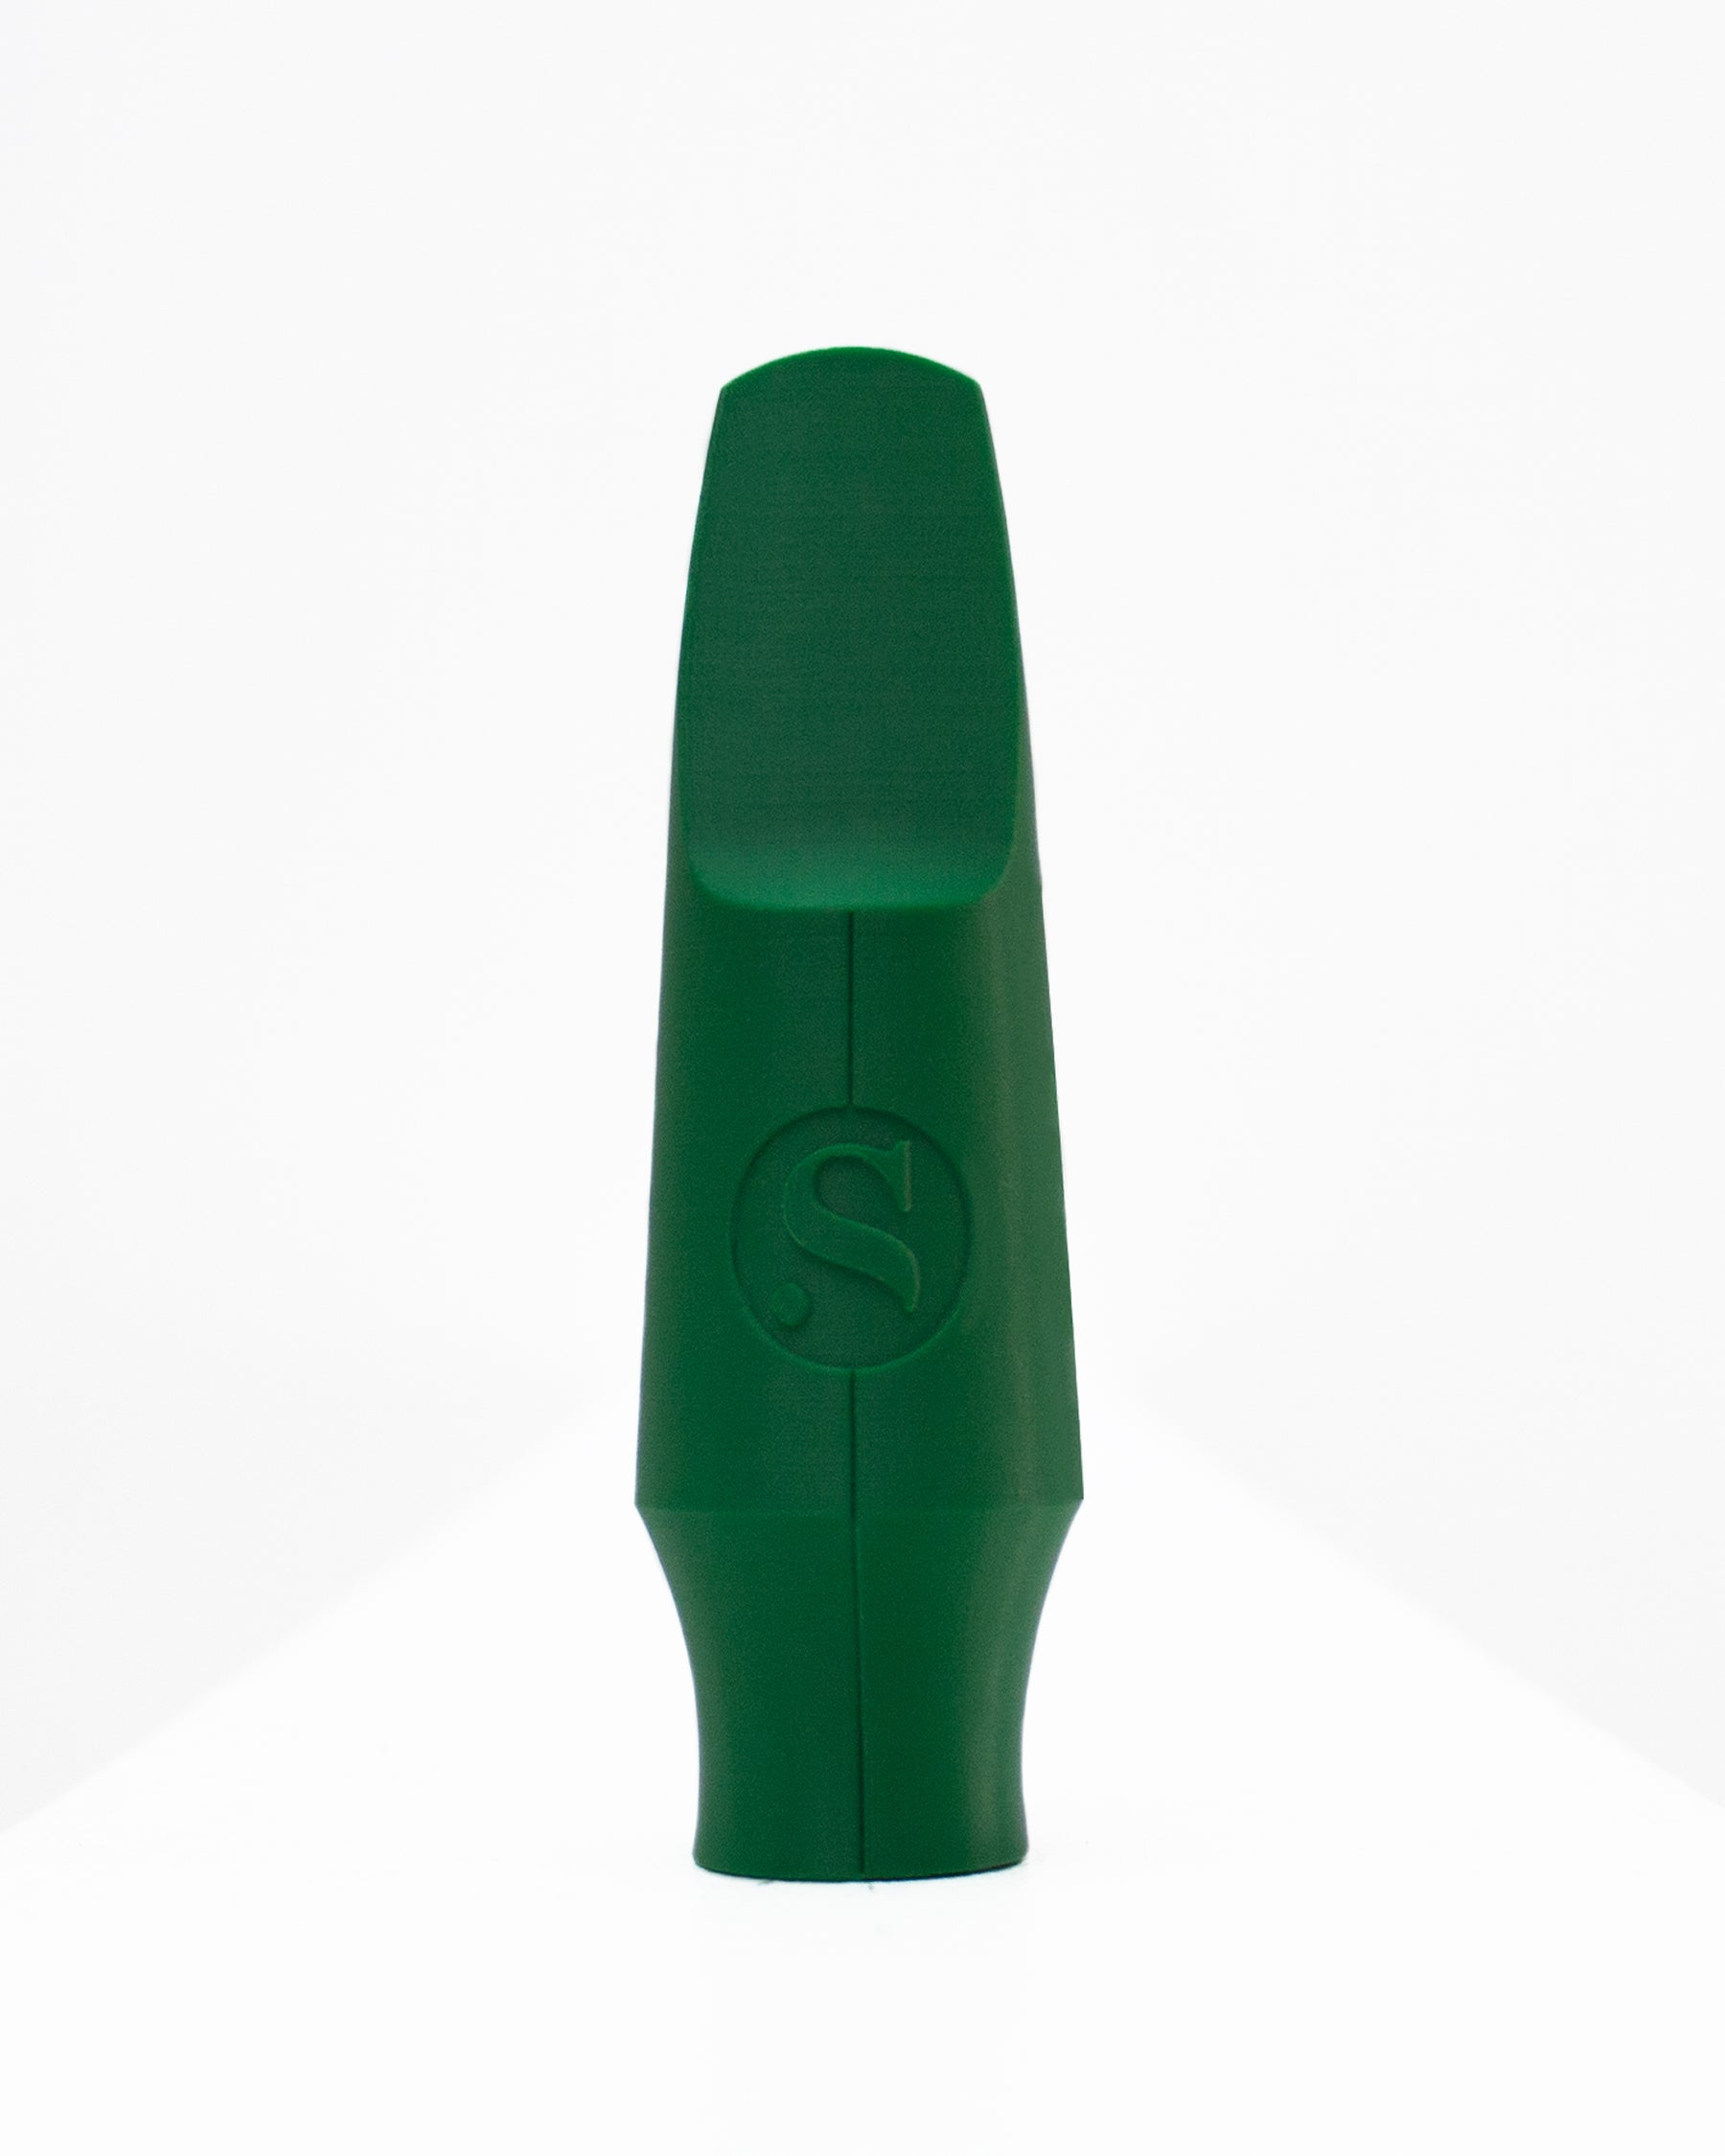 Tenor Signature Saxophone mouthpiece - Tivon Pennicott by Syos - 9 / Forest Green